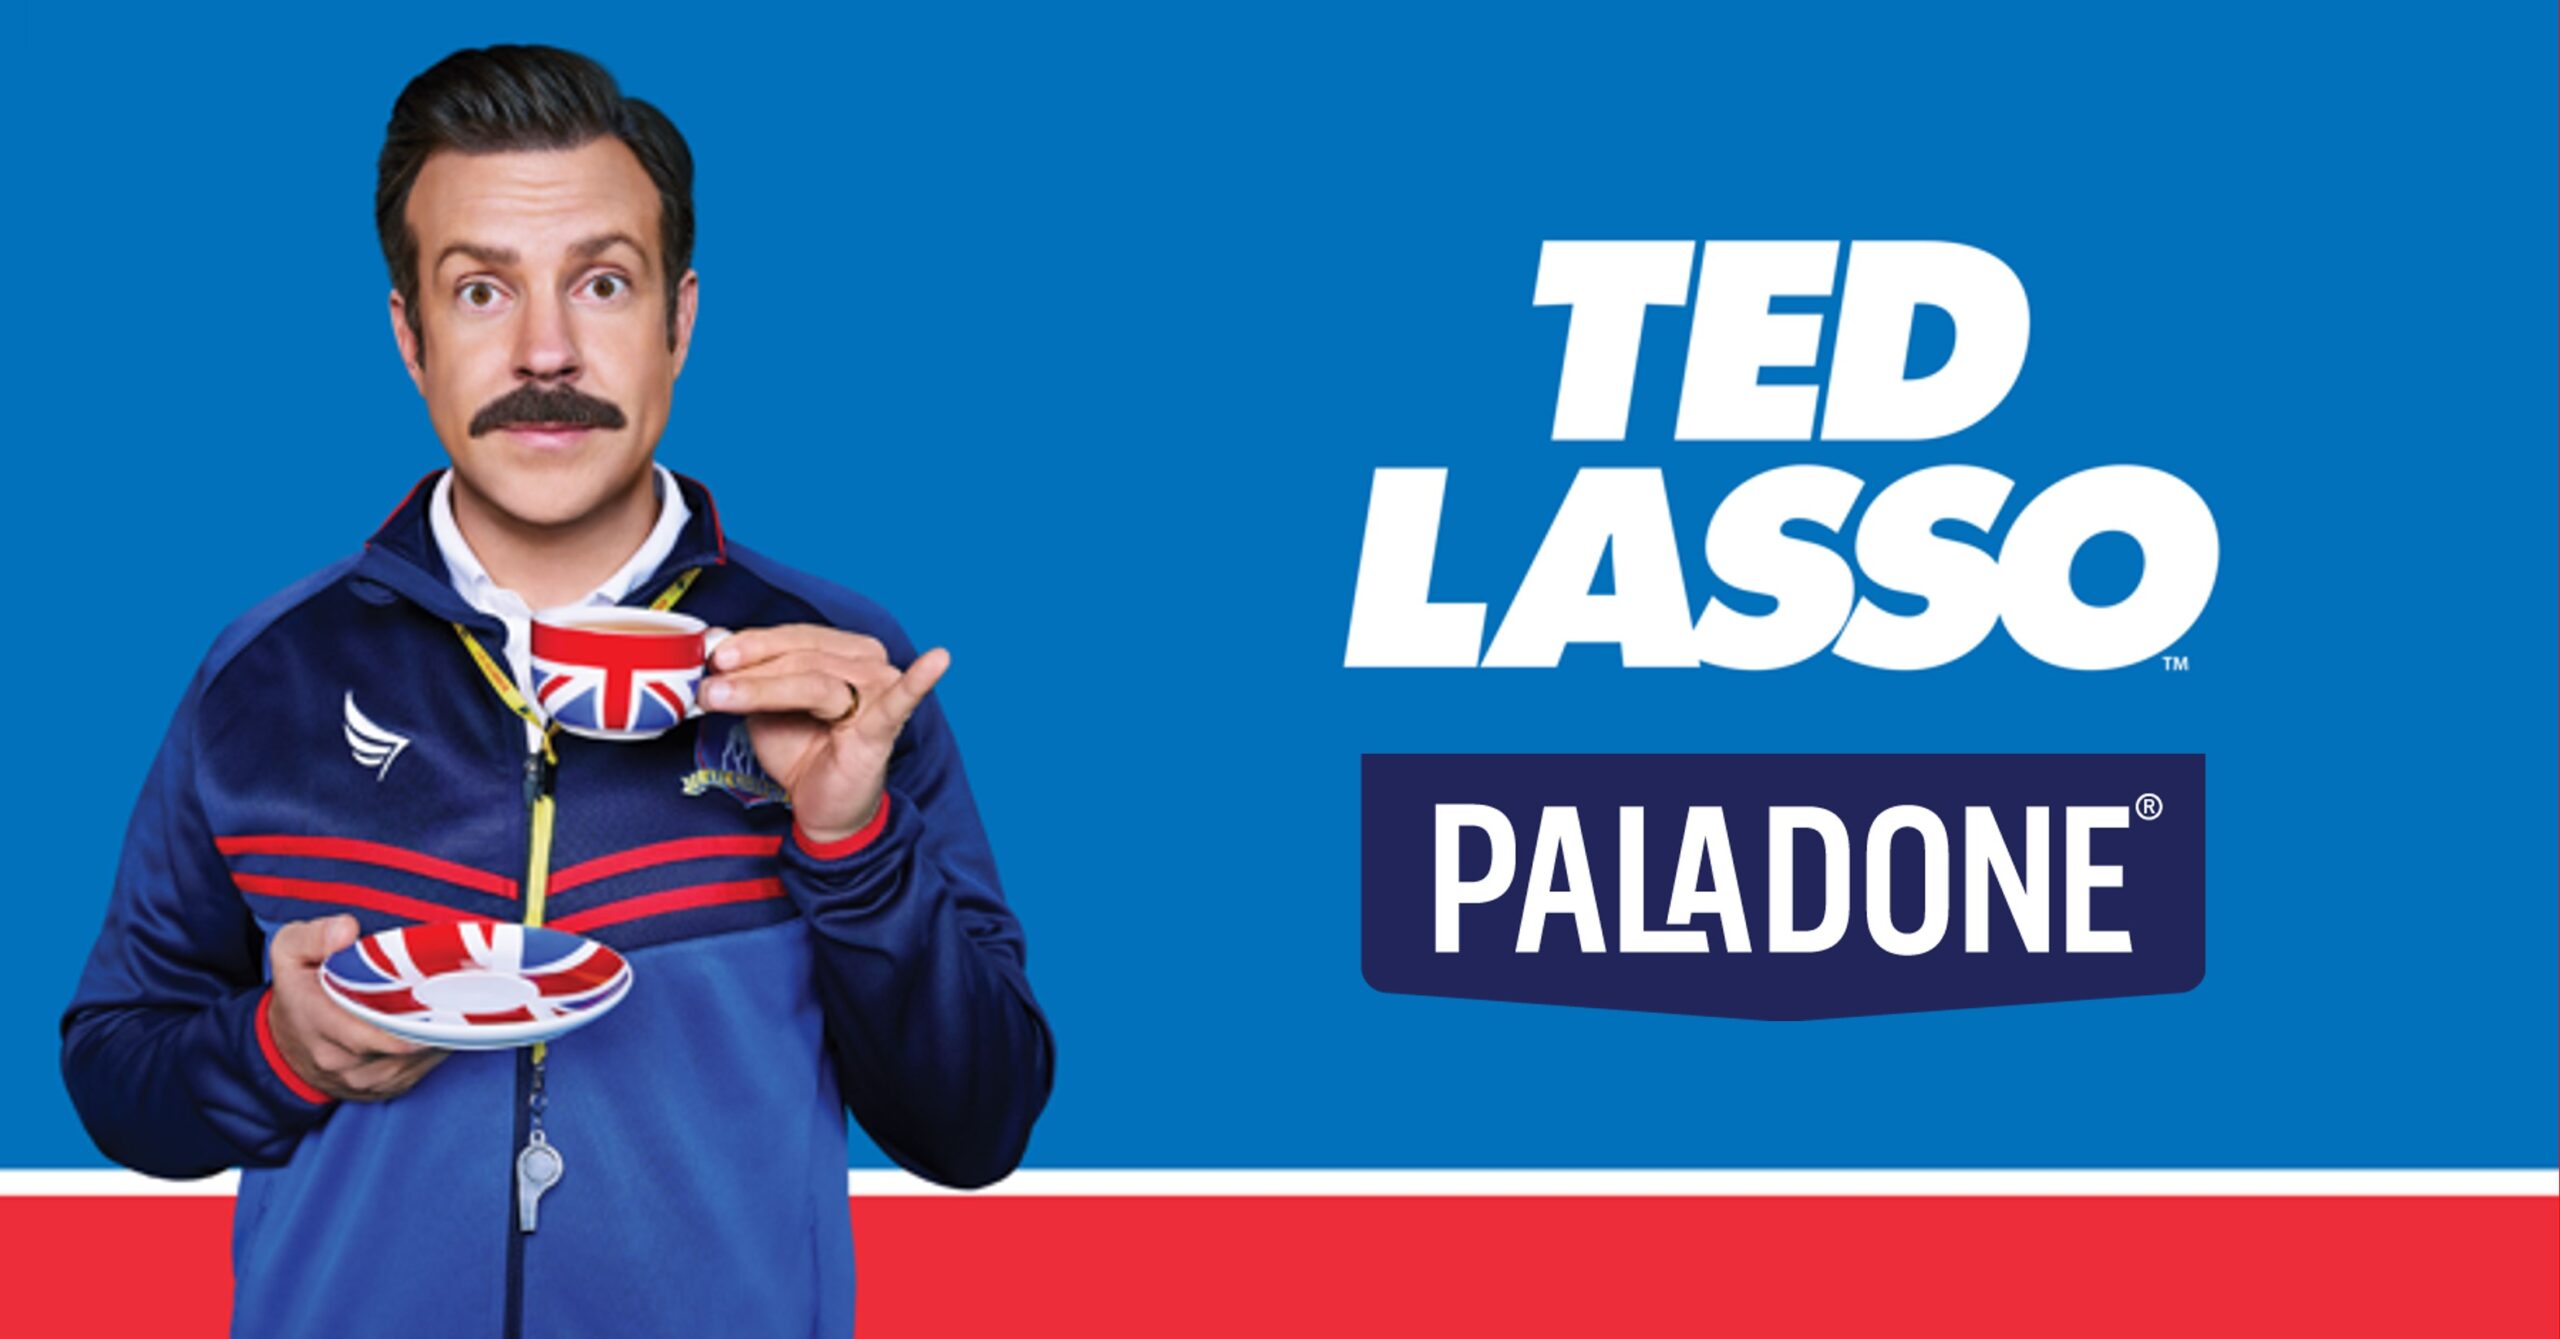 Paladone and Warner Bros. Partner for Ted Lasso Collection